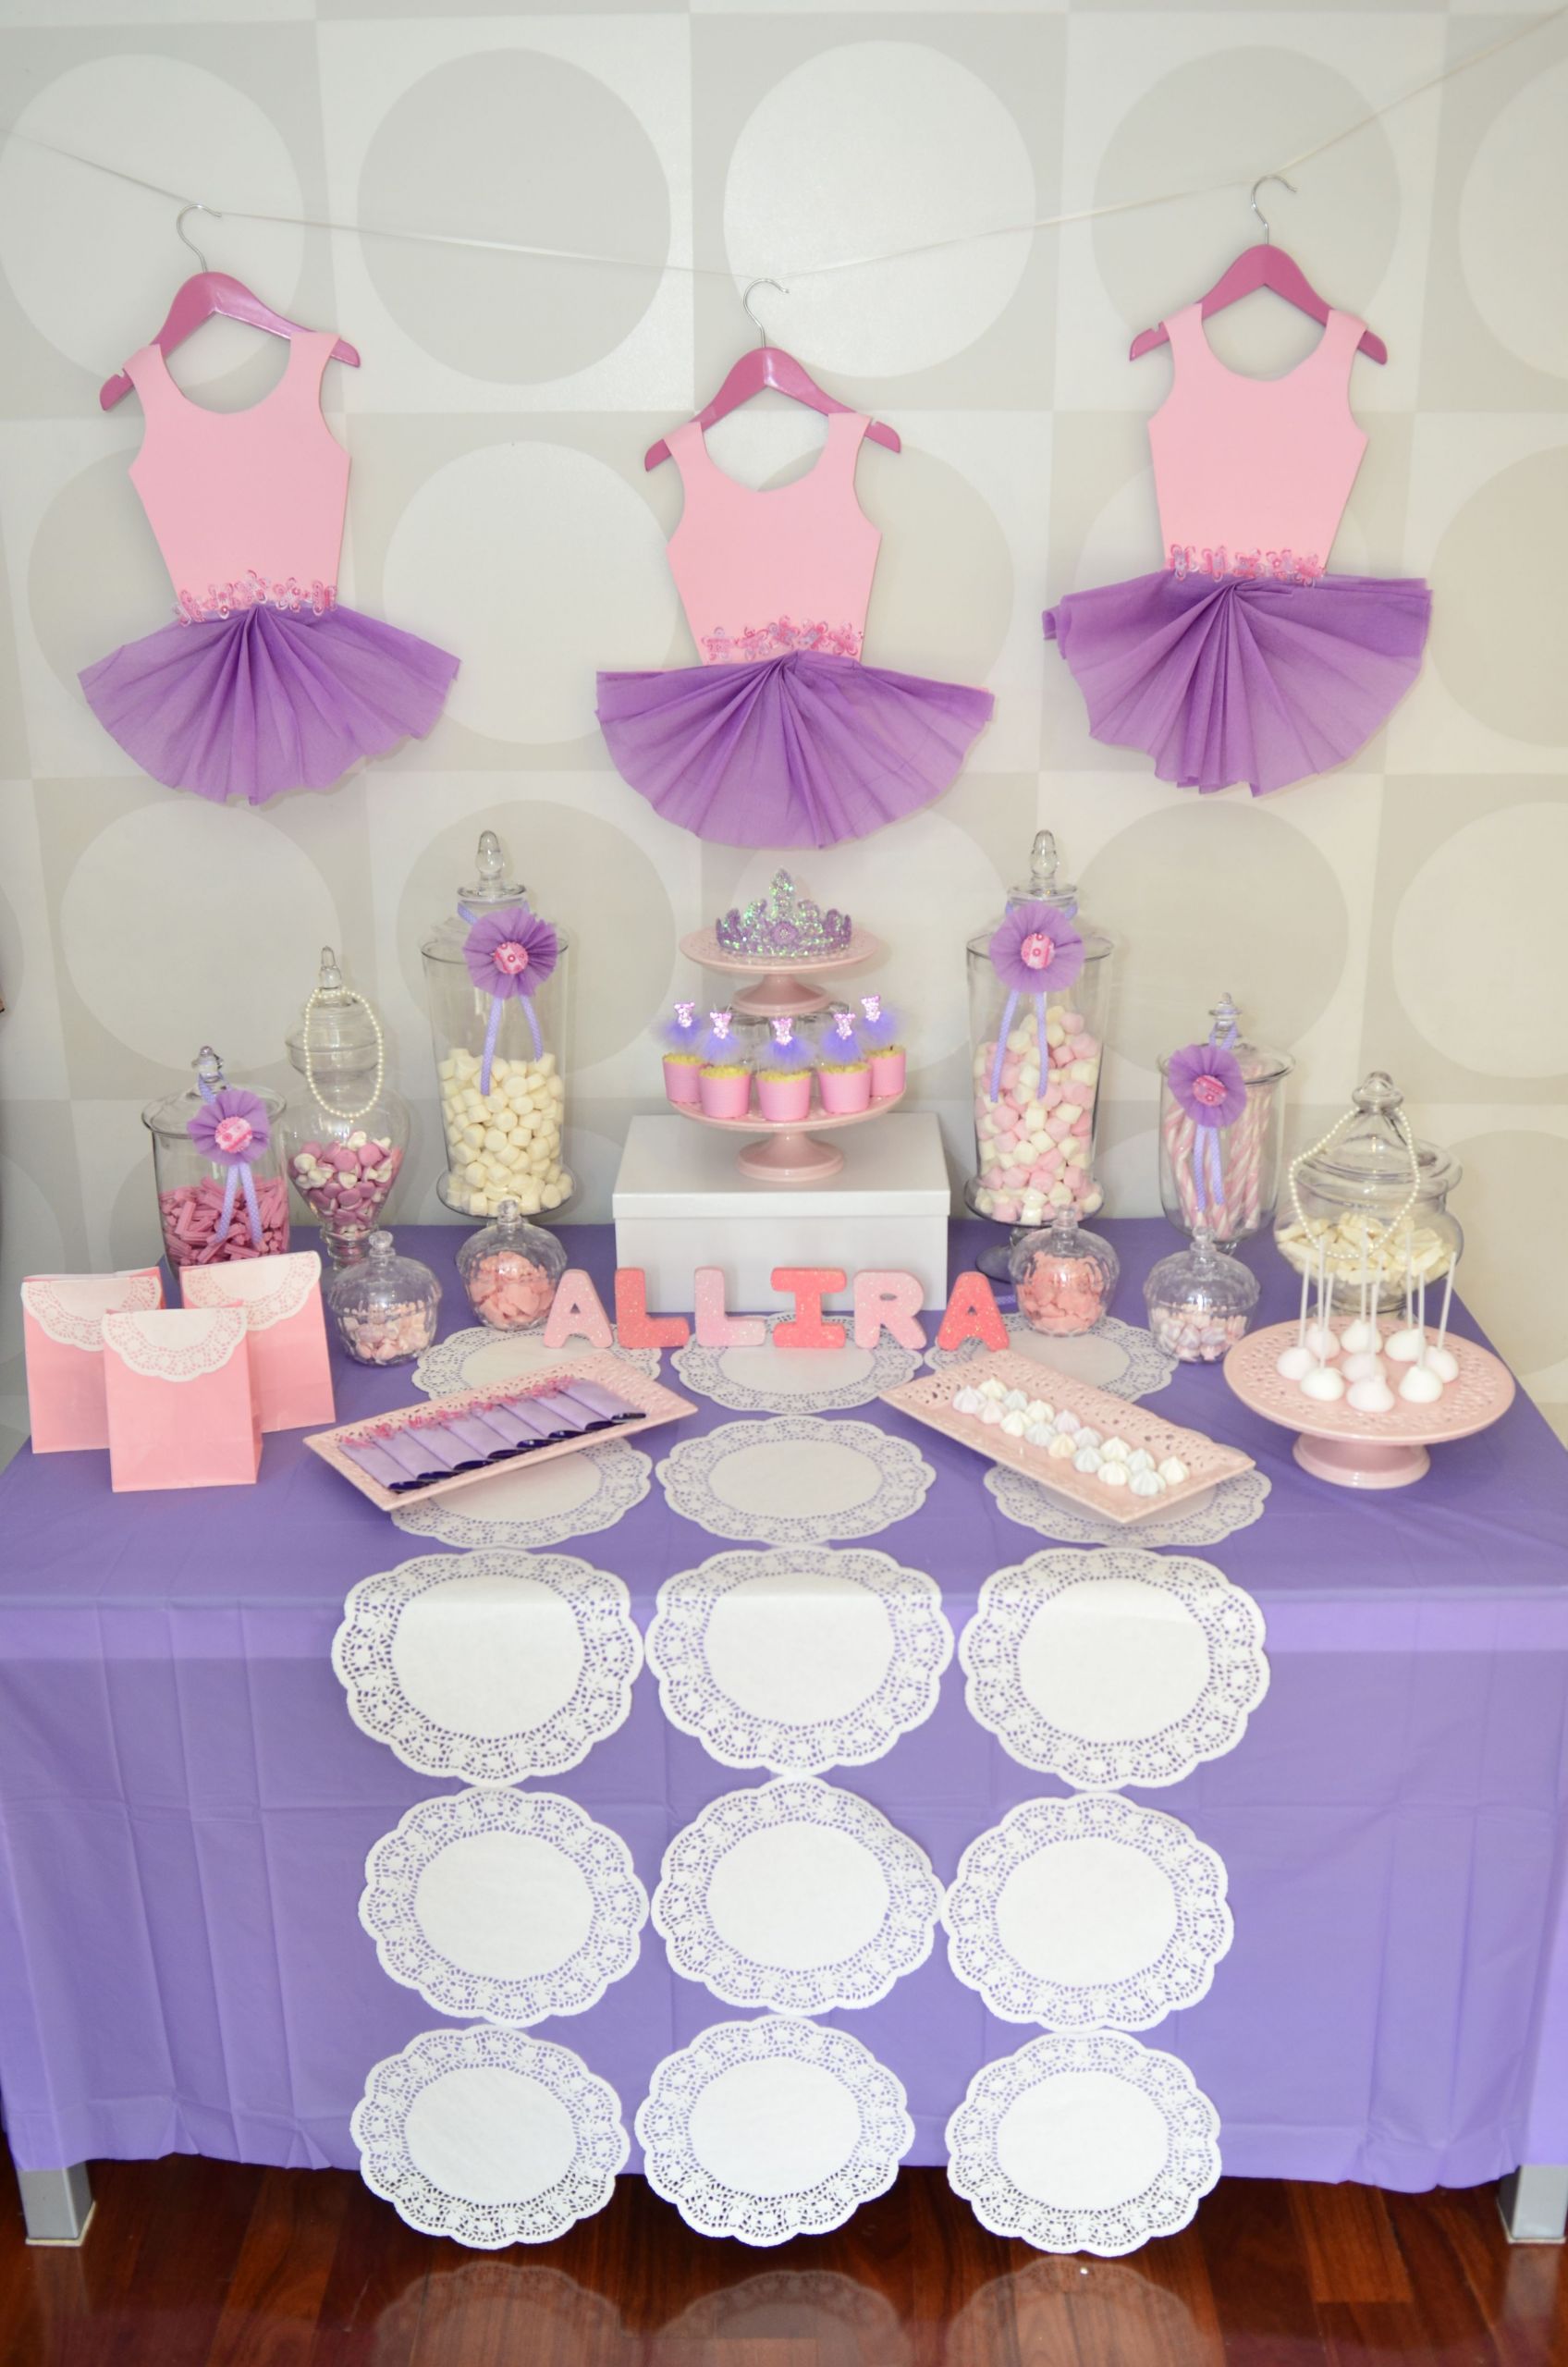 Party Decorations For Baby Shower
 Ballerina Theme Candy Bar